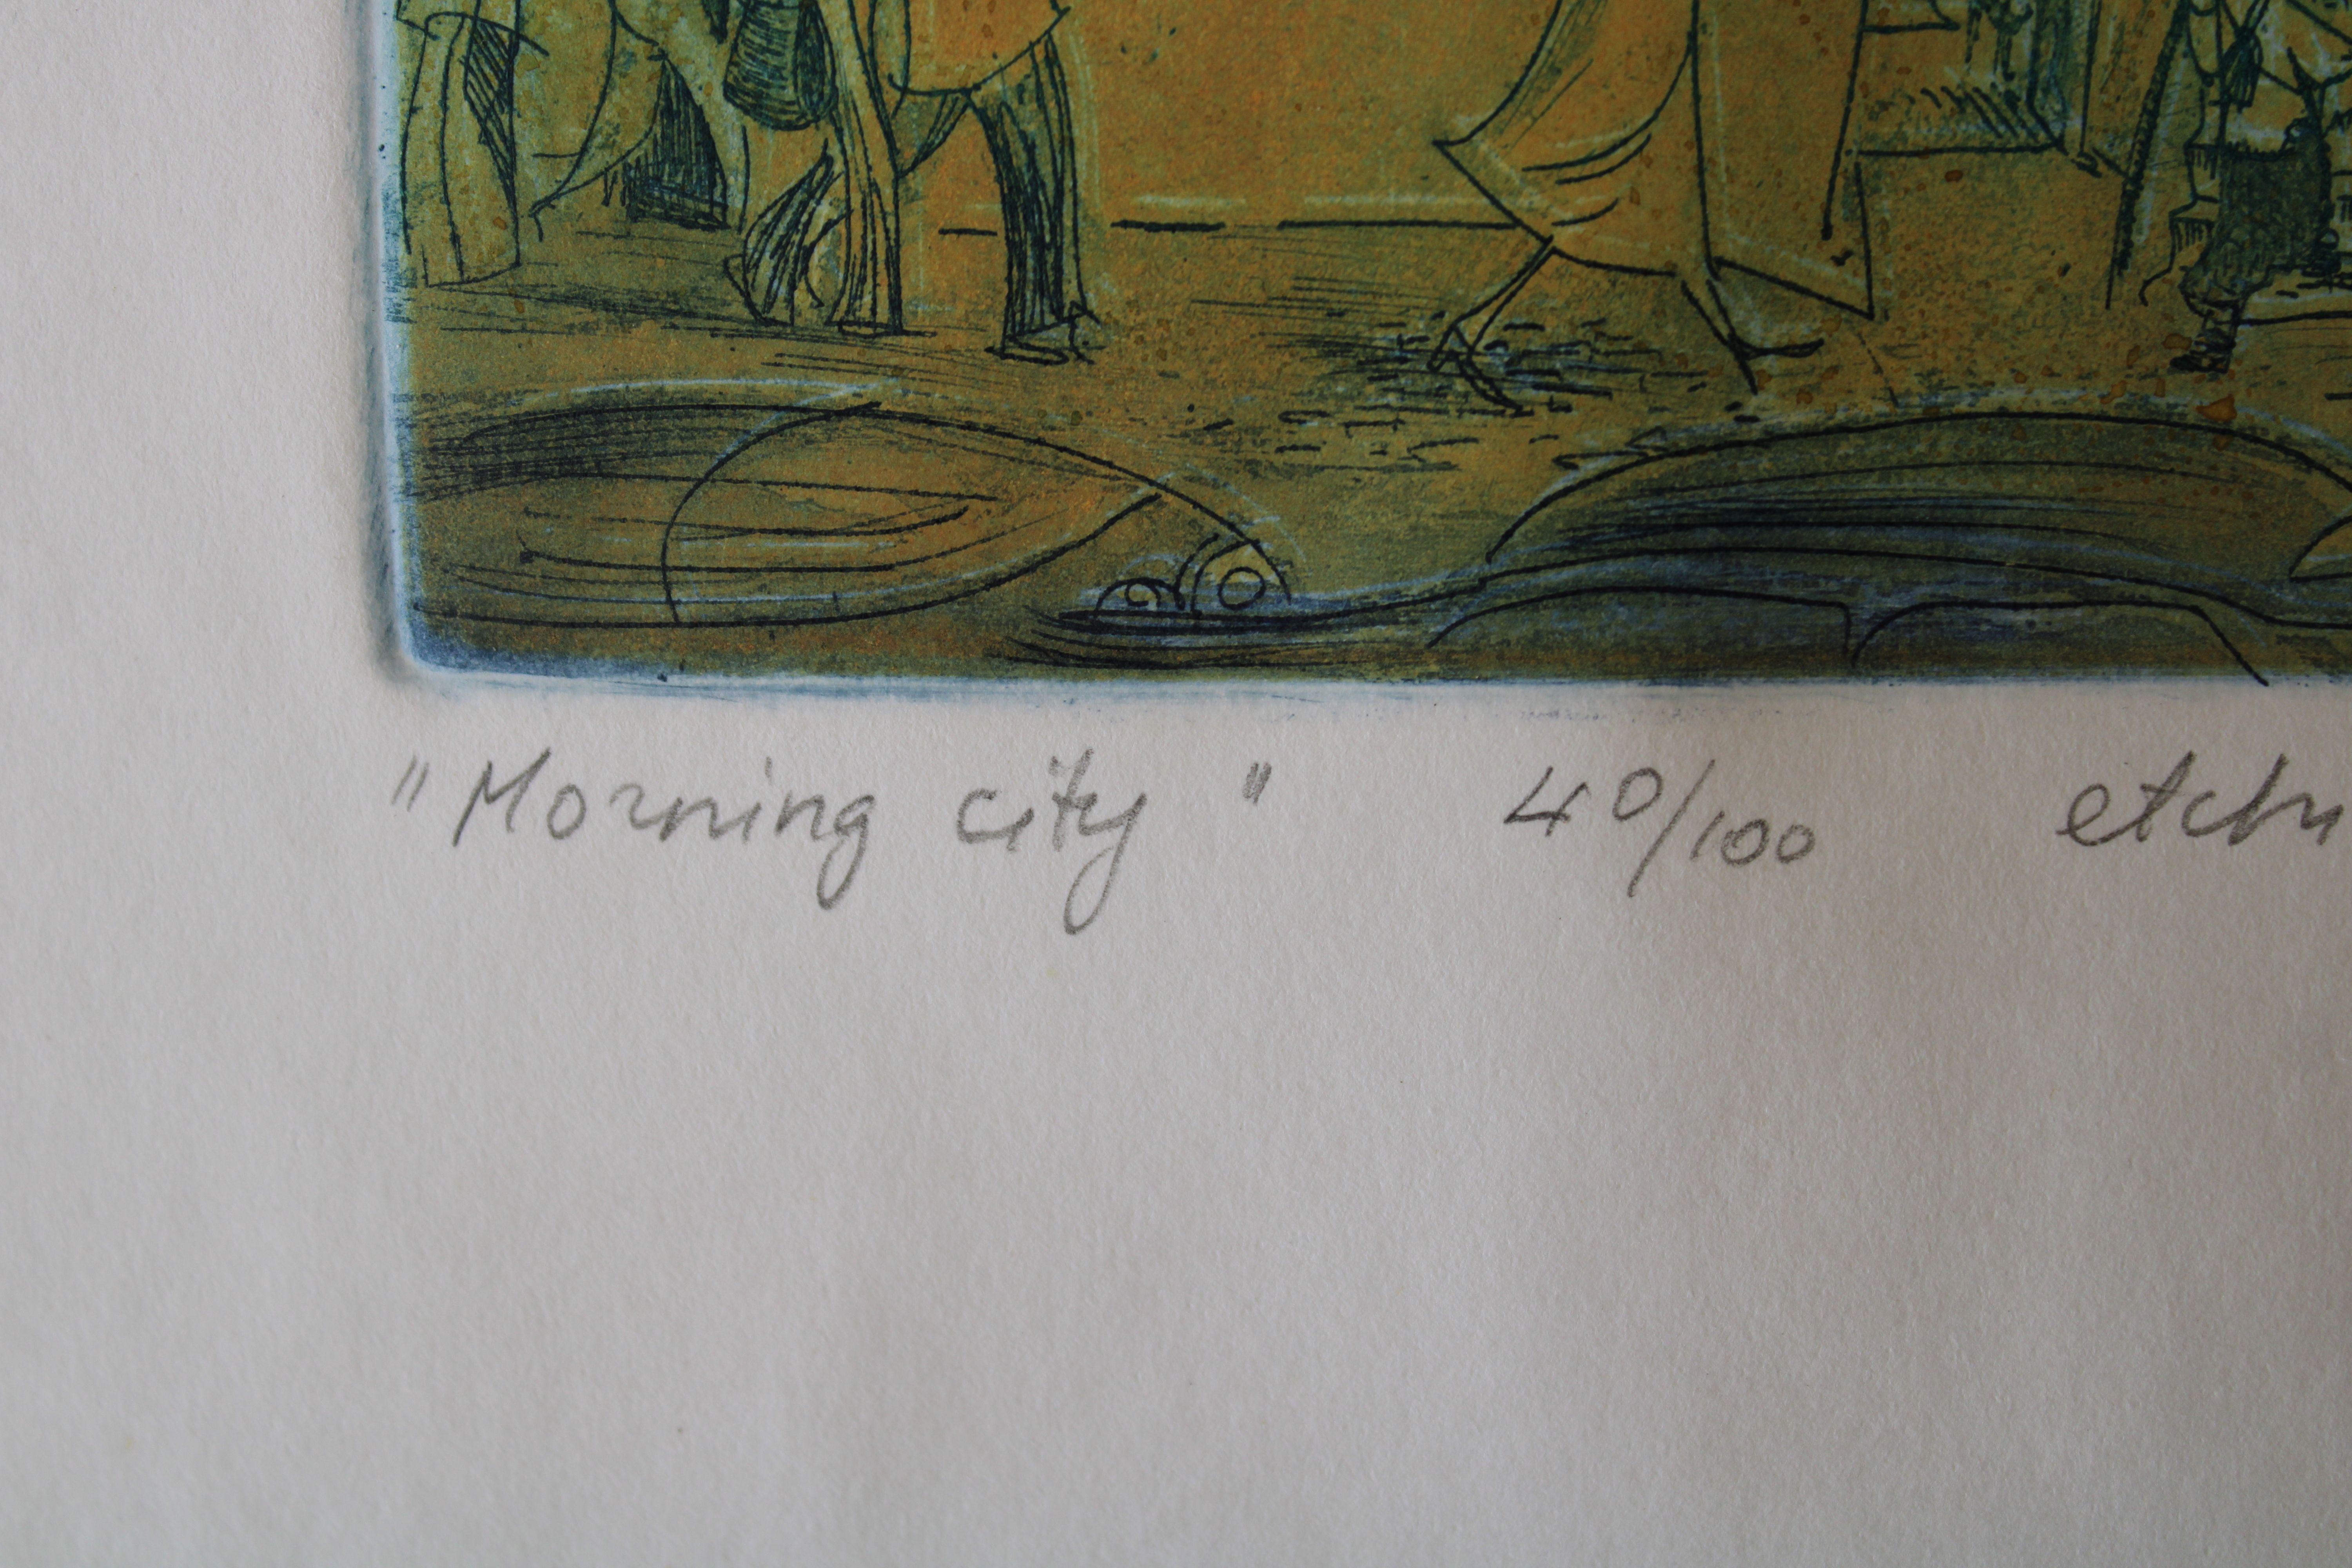 Morning city  2005, paper, etching, 14x16 cm, 40/100 For Sale 3